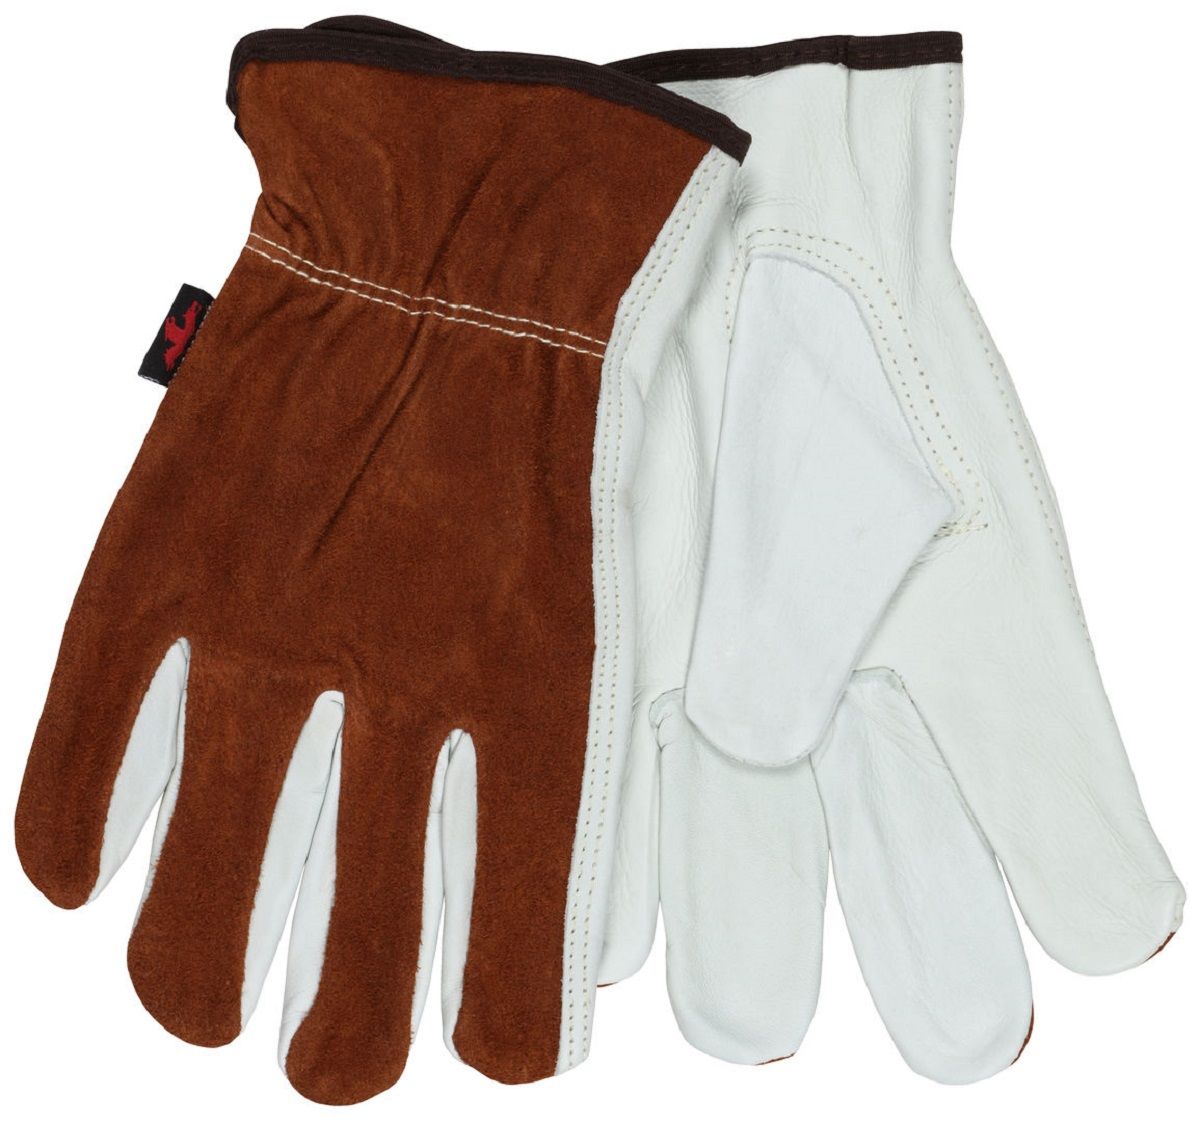 MCR Safety 3205 CV Grade Grain Palm, Leather Drivers Work Gloves, Beige, Box of 12 Pairs